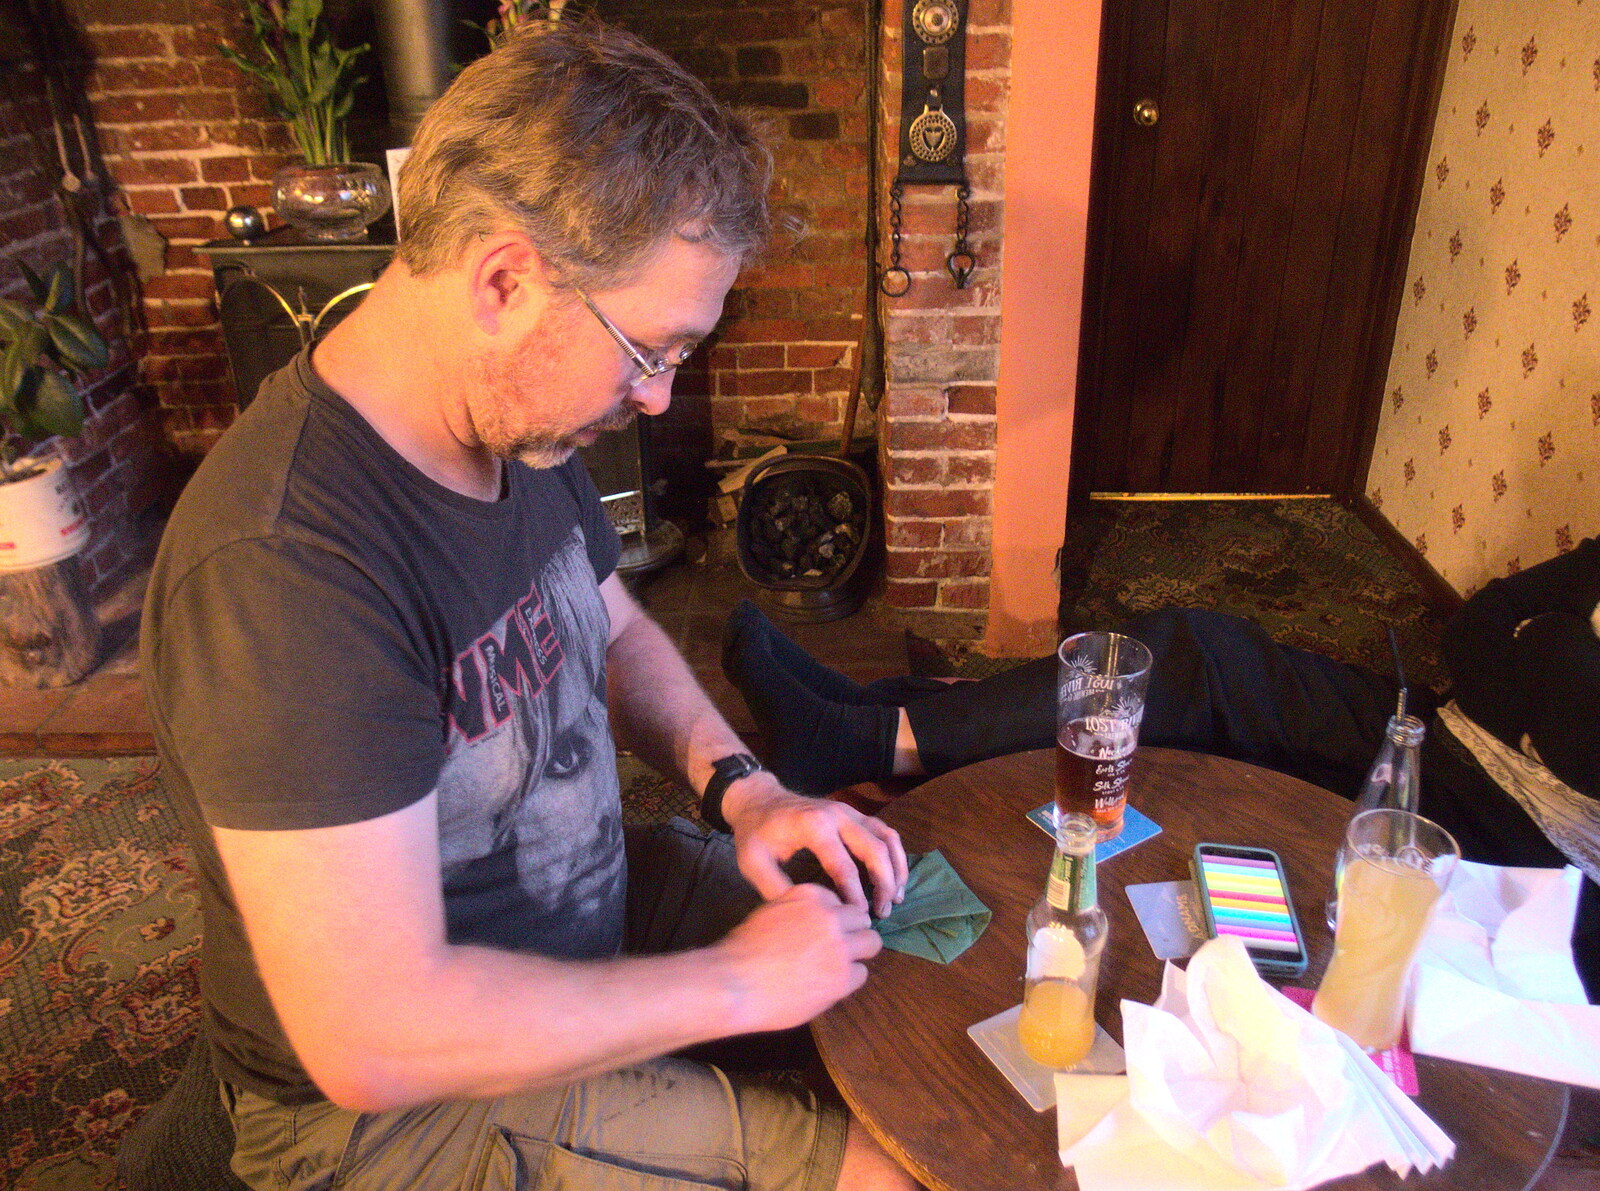 Marc's doing some origami too from The BSCC at the Mellis Railway and The Swan, Brome, Suffolk - 8th June 2017